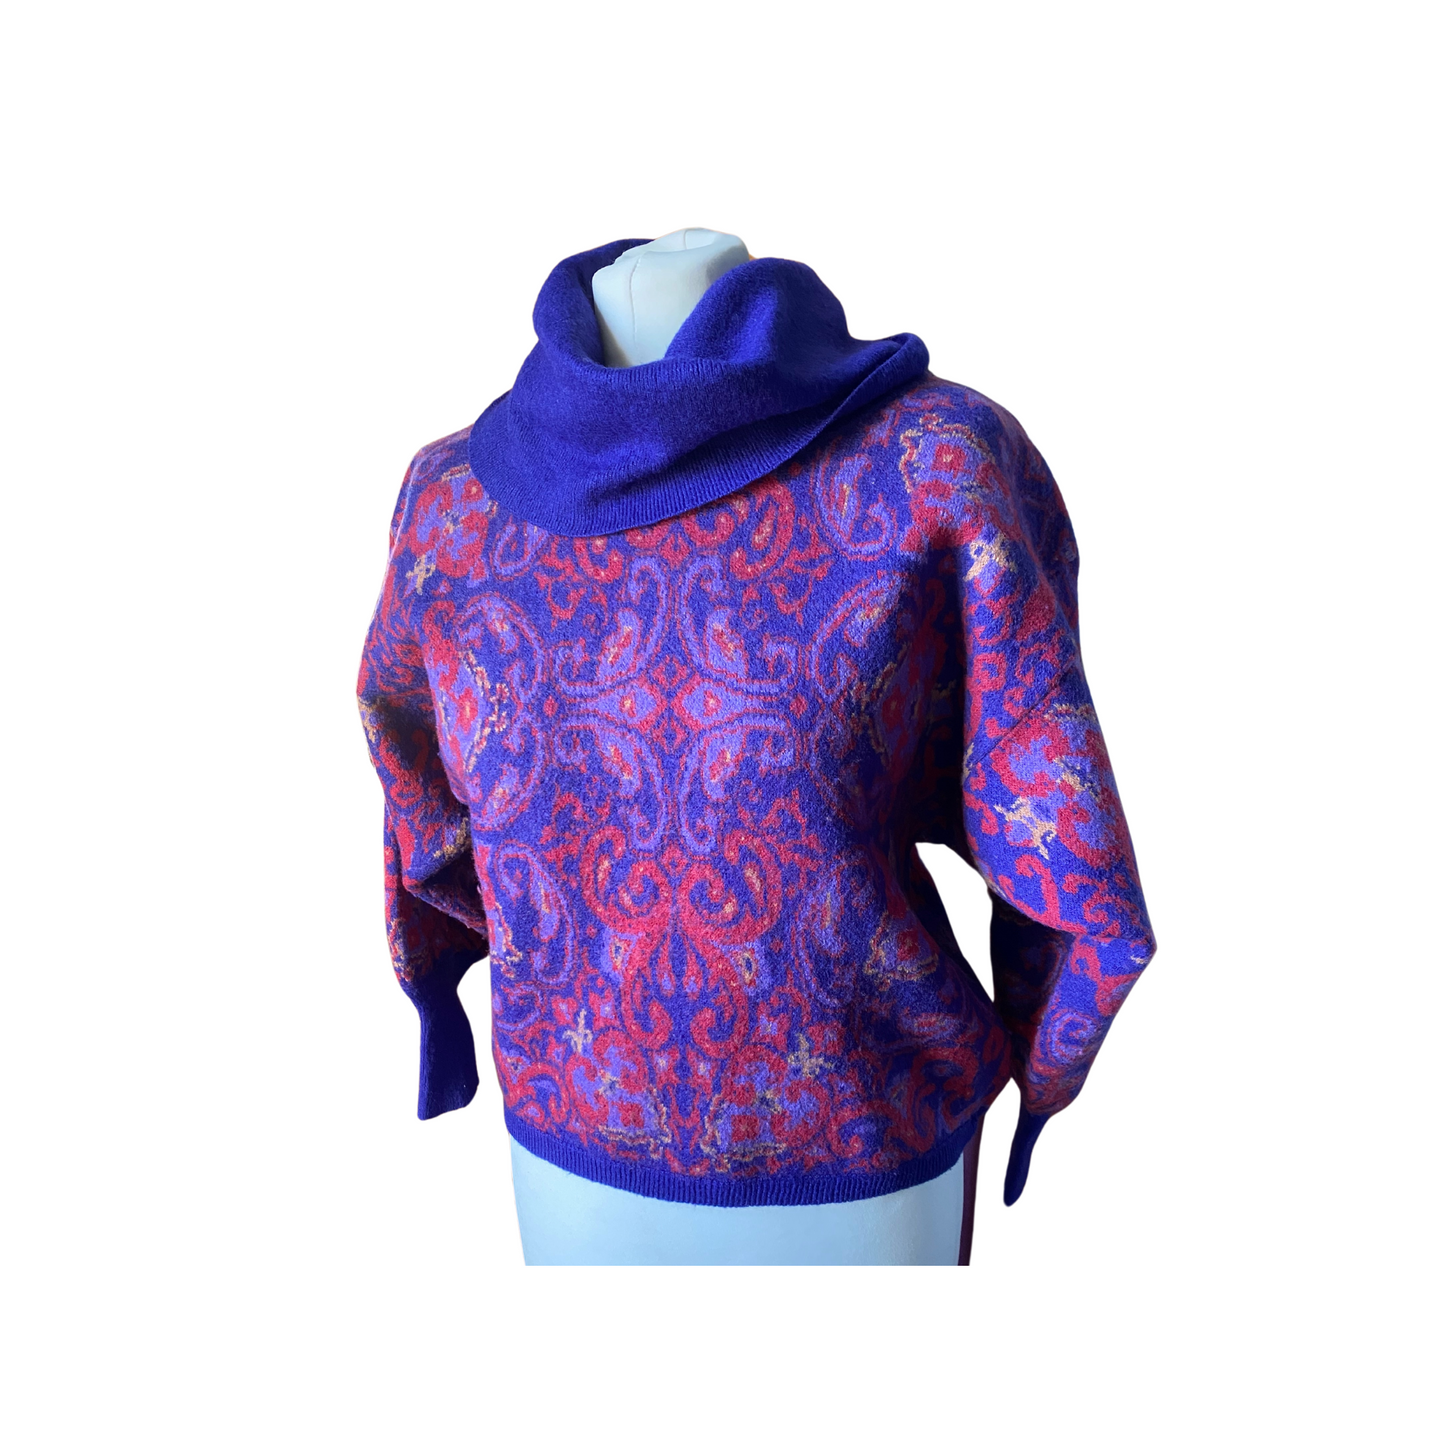 Vibrant 80s purple patterned cropped sweater